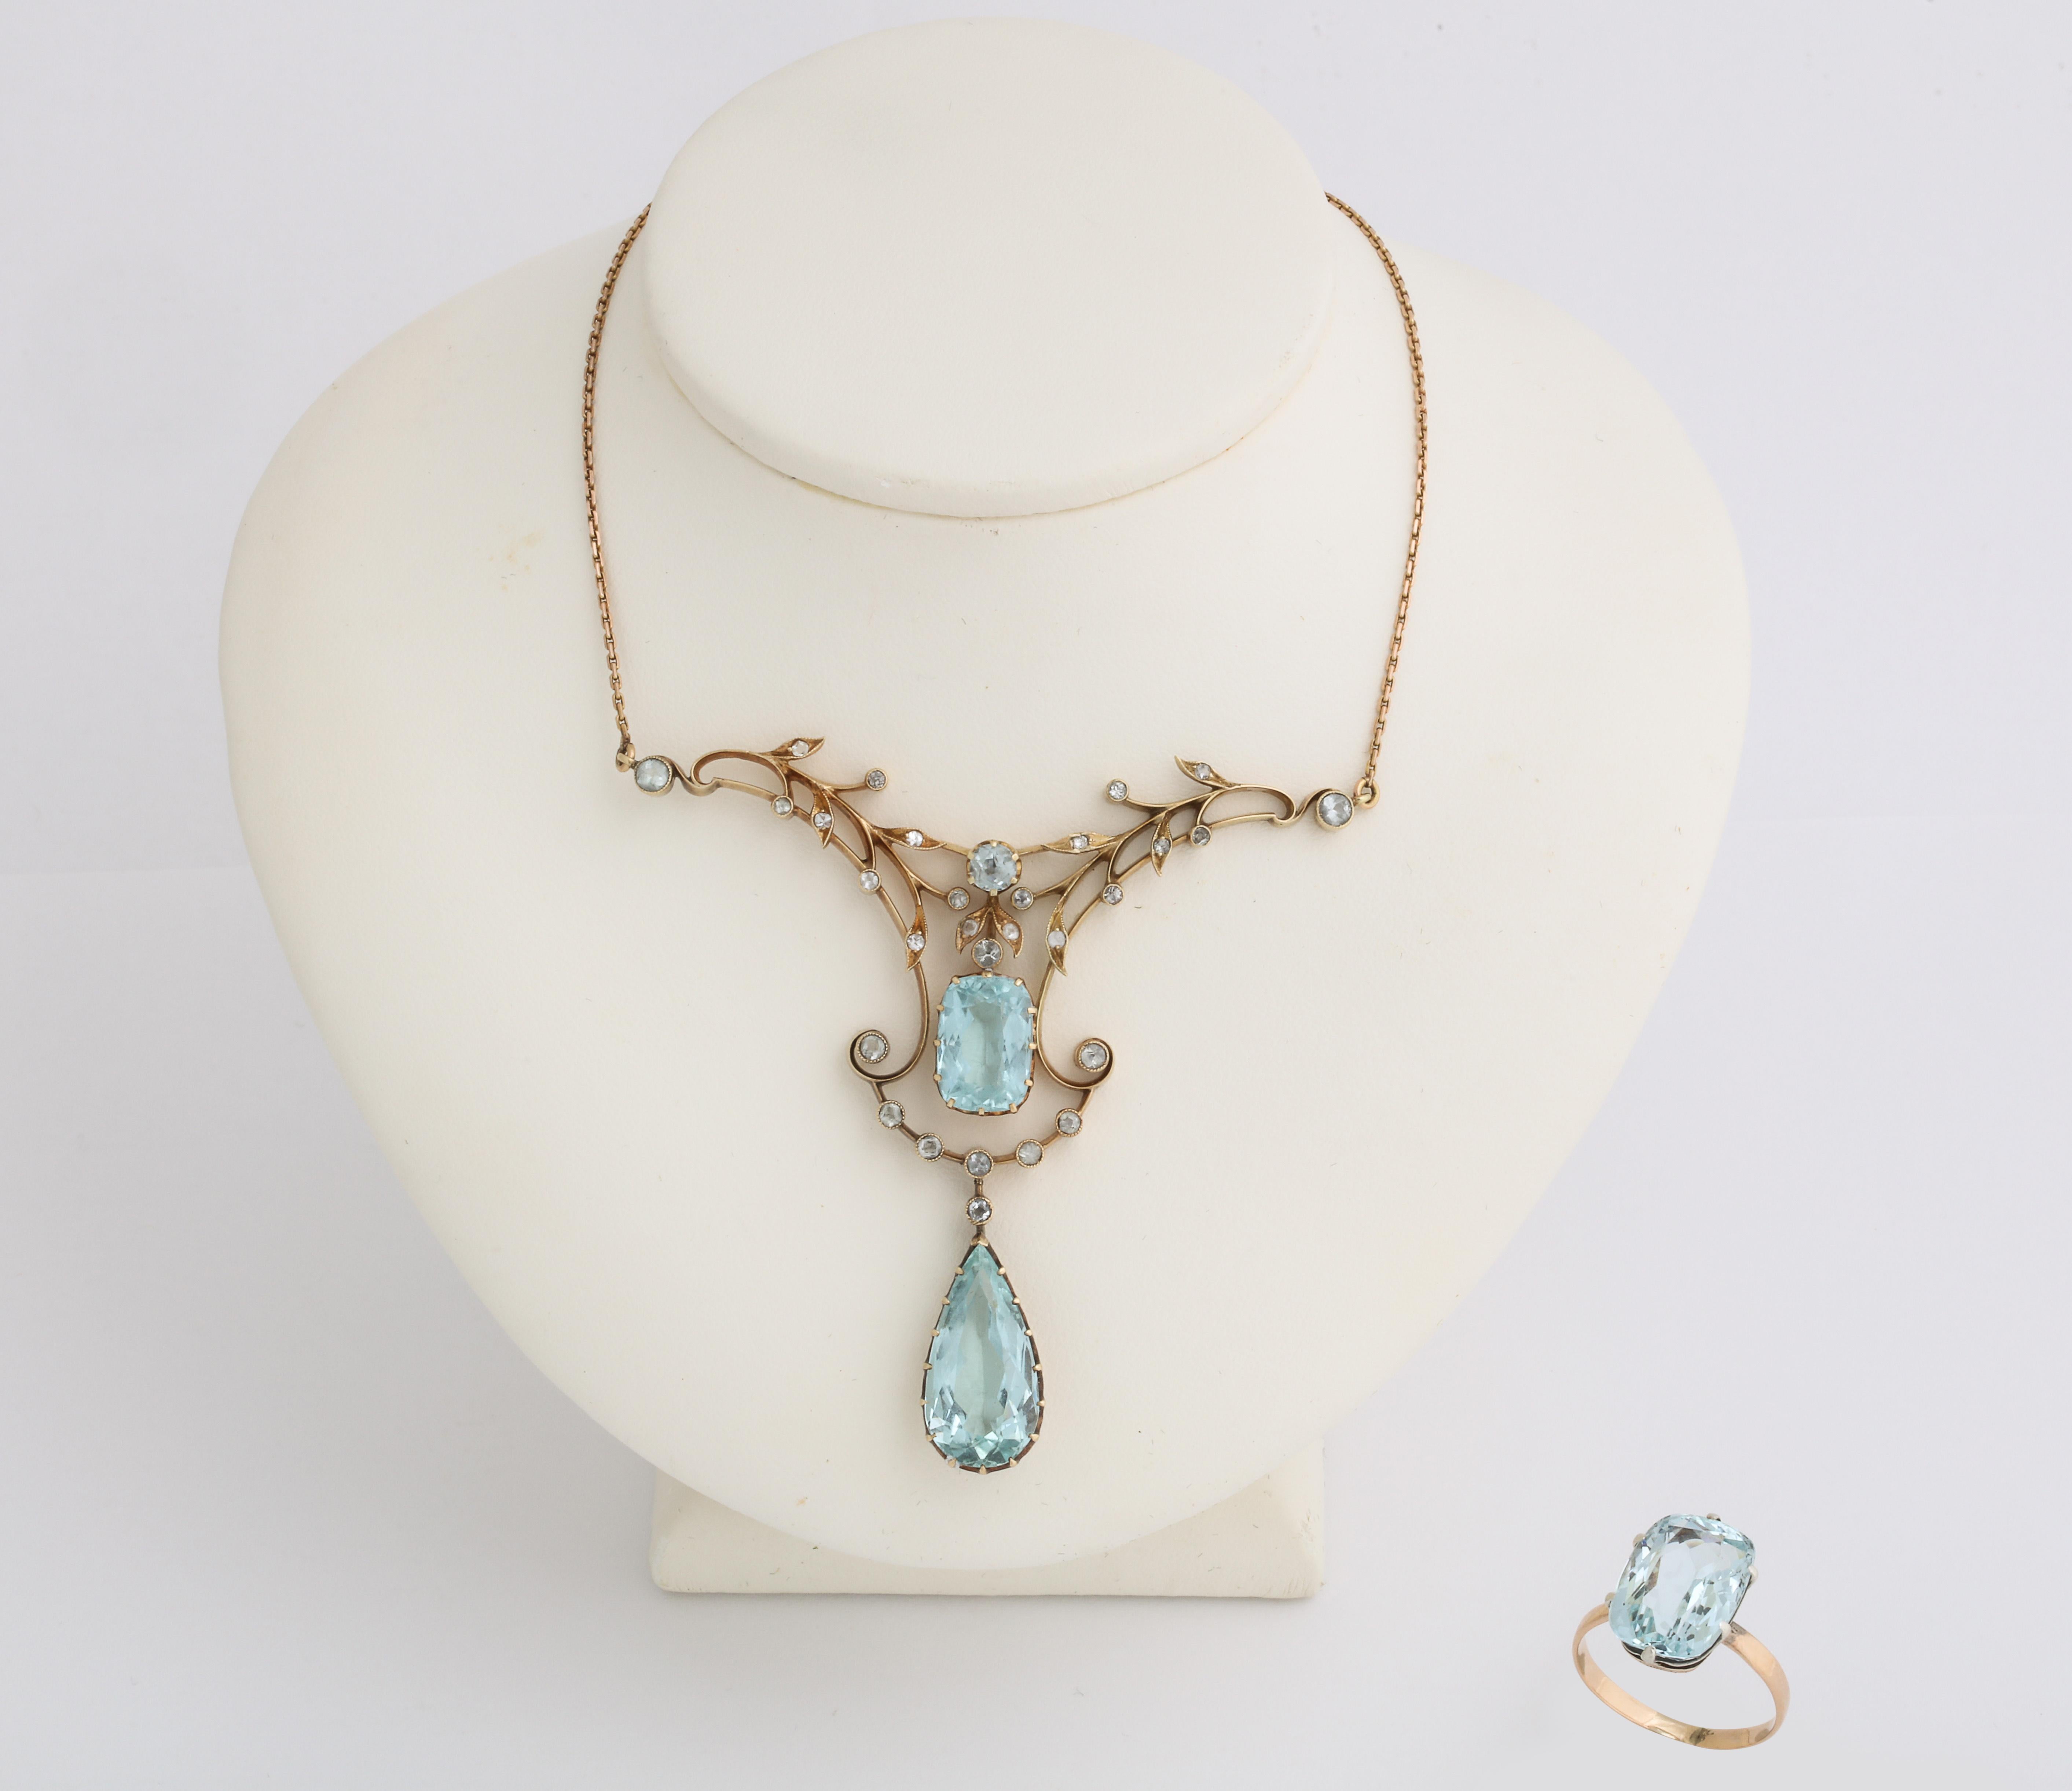 This rare Russian demi-parure is from the Romanov era, period of Tsar Nicholas II. It comprises a garland style necklace of scrolling and foliate design set with a pear-shaped aquamarine suspended from a cushion-shaped aquamarine and is accented by